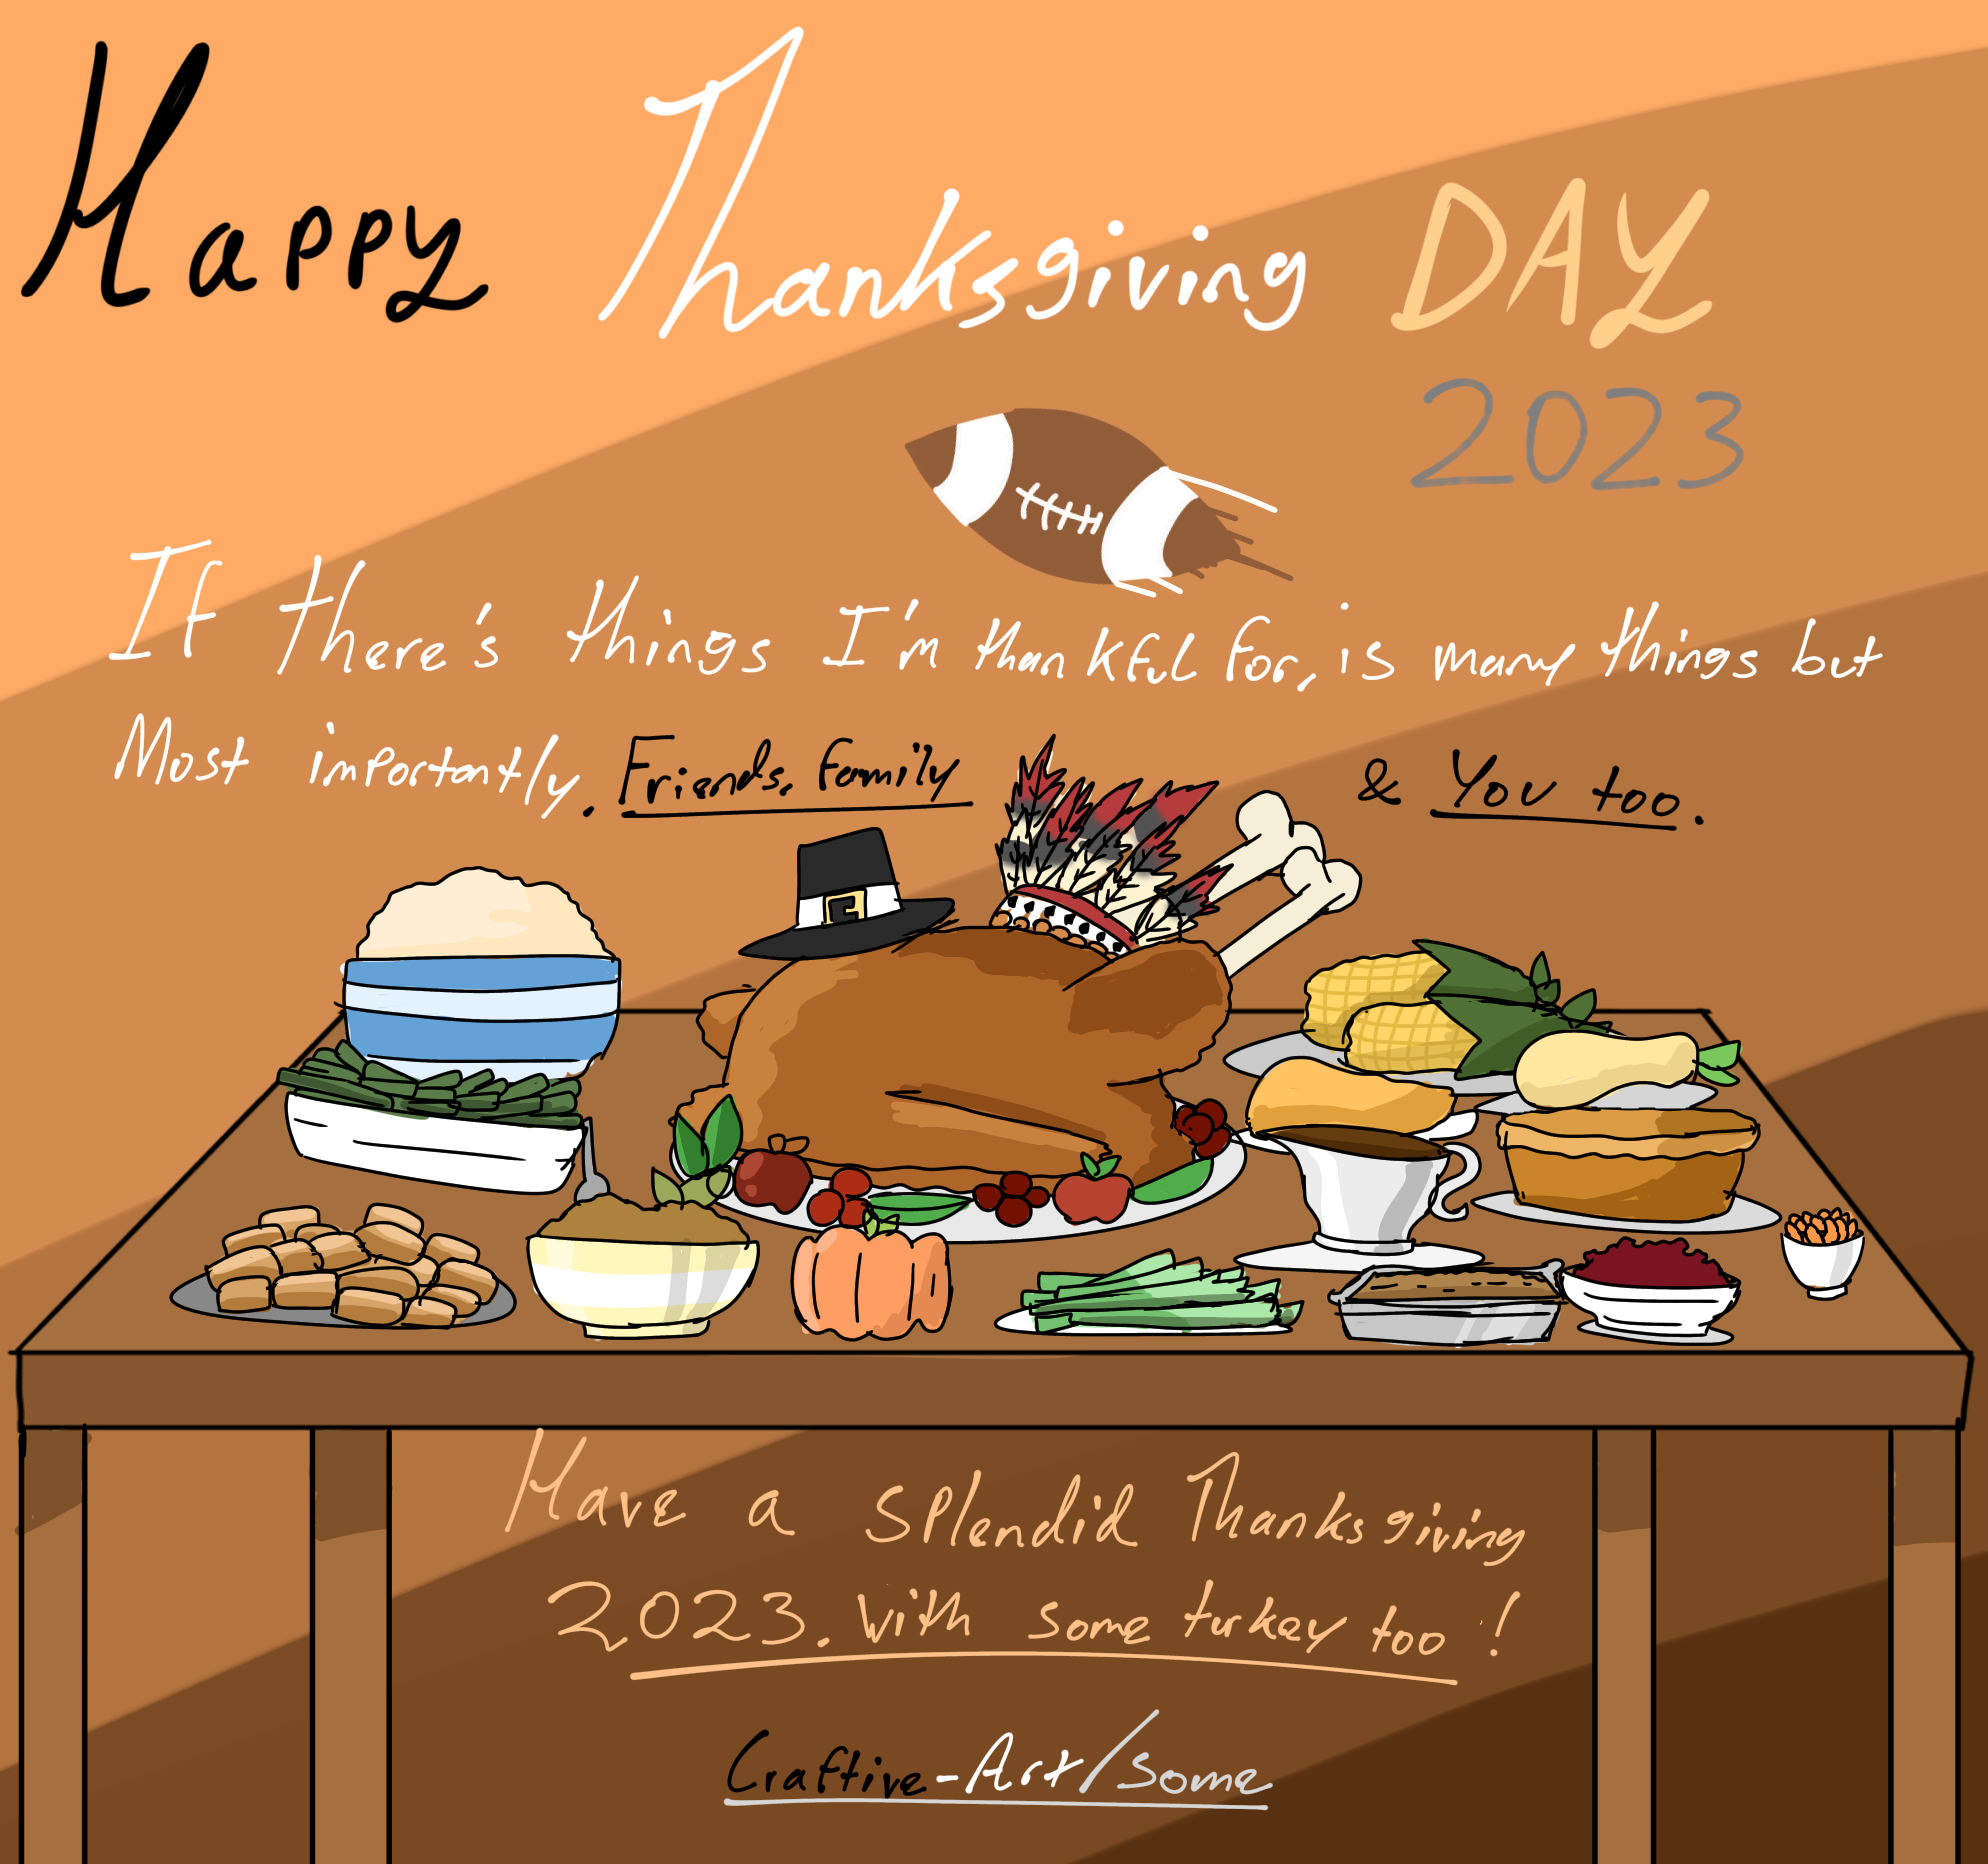 Thanksgiving Day 2023 Images in 2023